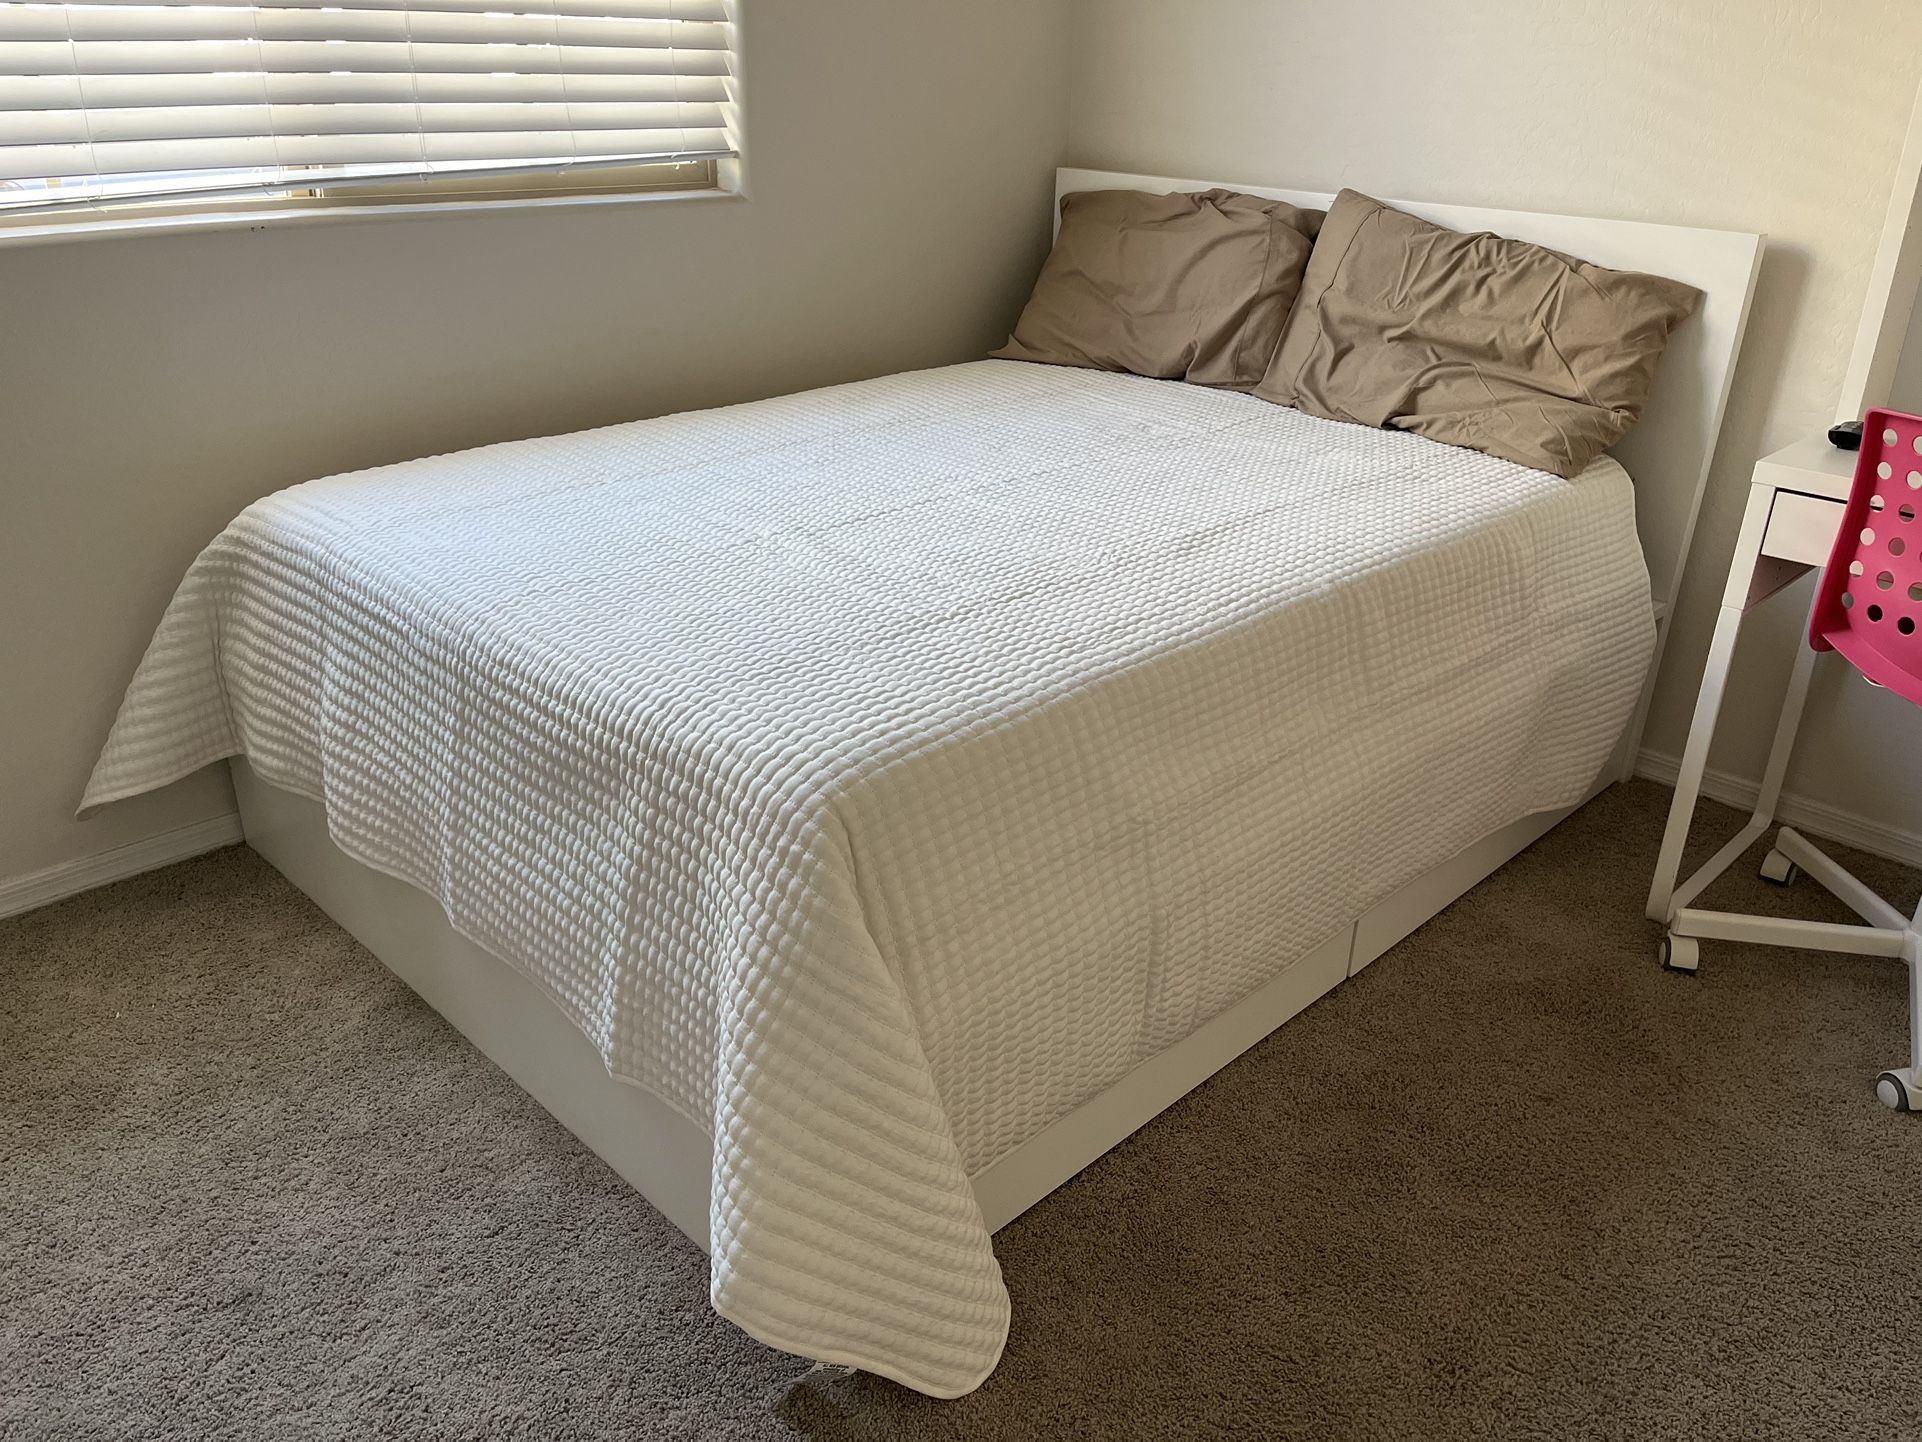 Full-sized mattress And Bed frame